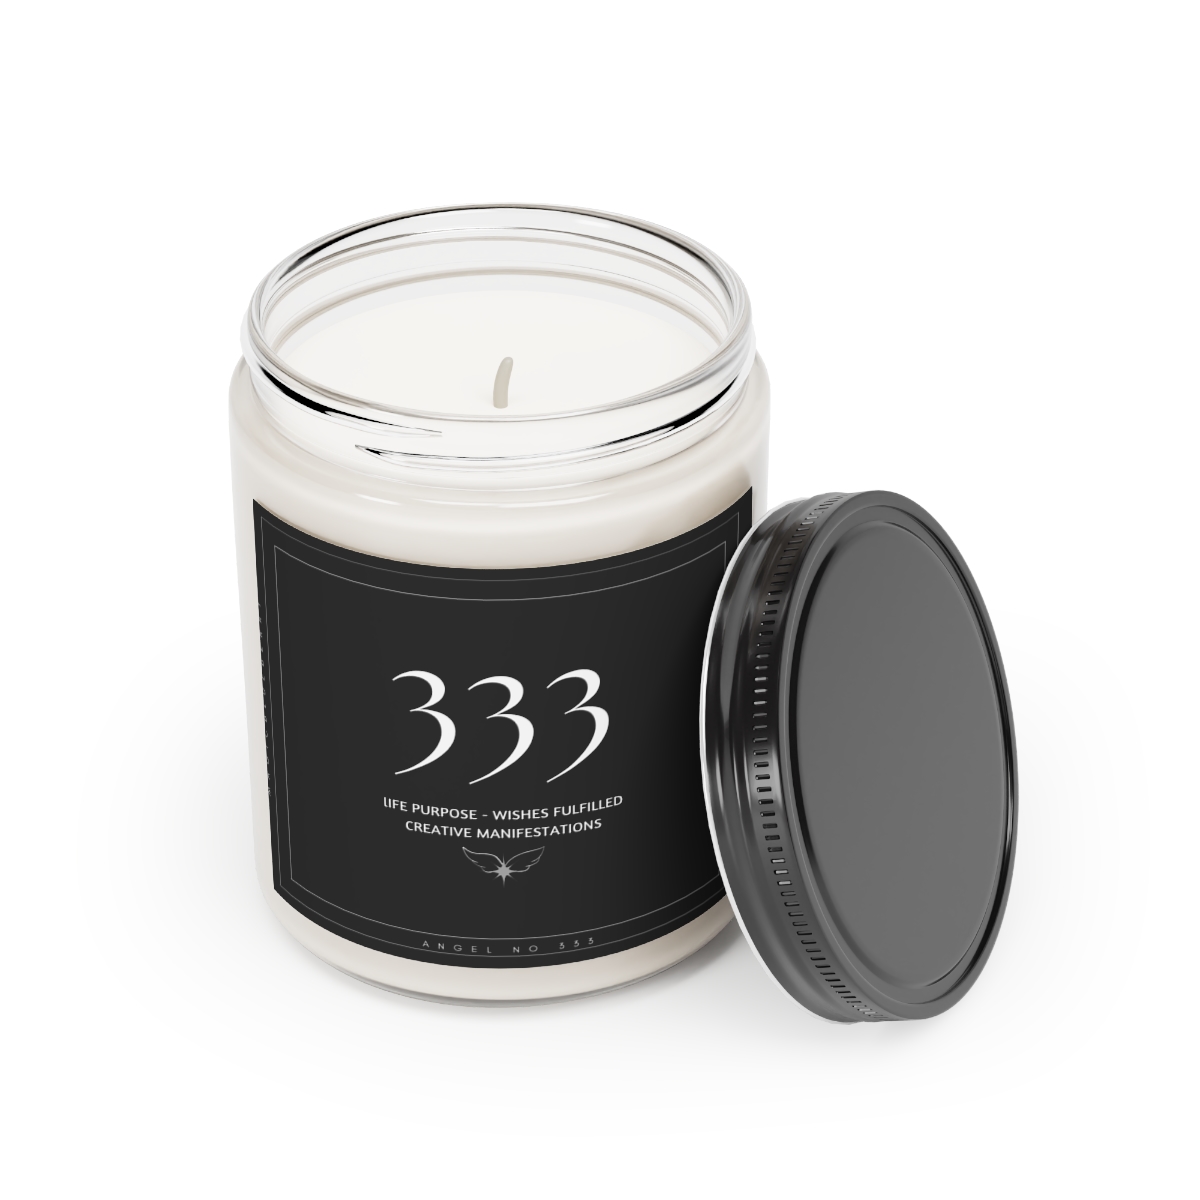 Angel Spell 333 - Scented Vegan Soy Wax Candles, Clear Jar Candle, Spell Candles, Sassy Candle, Vegan Candle, Cotton Wick Candle product thumbnail image